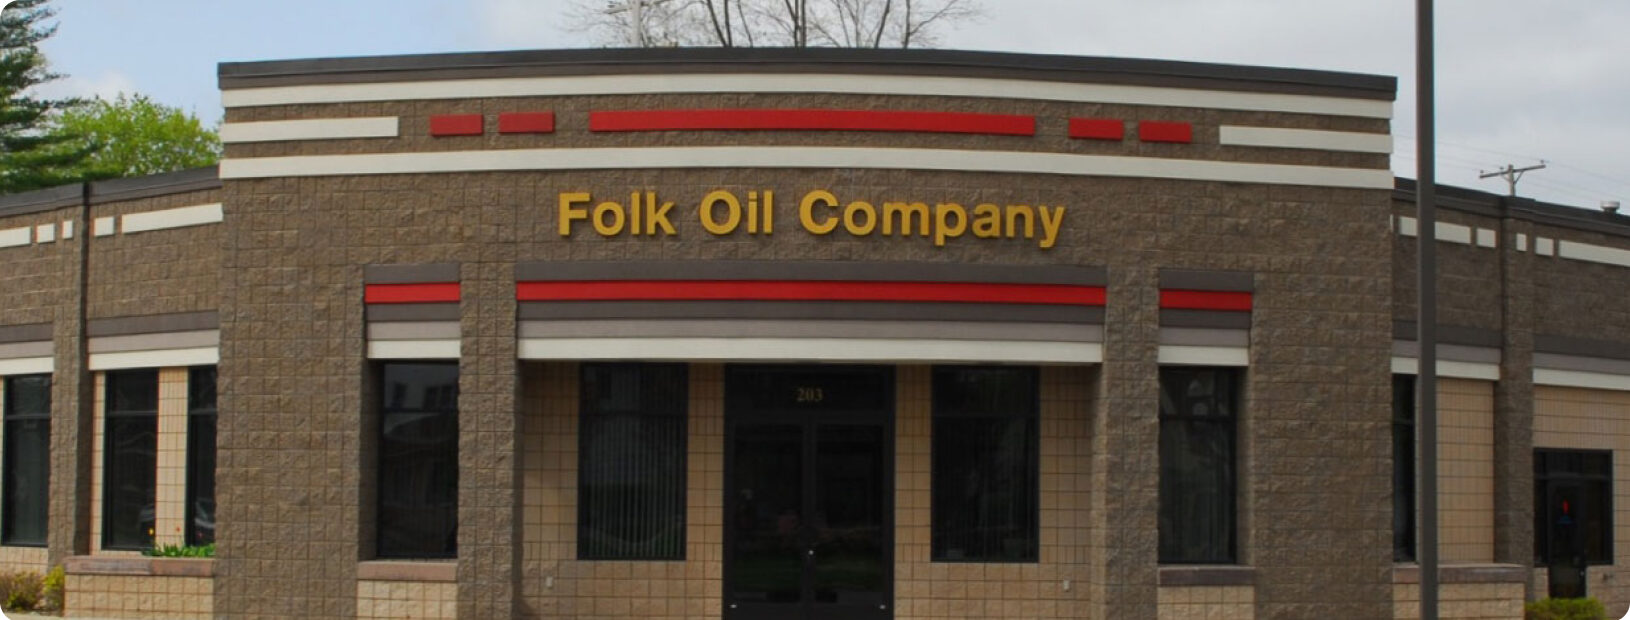 Close-up straight on photograph of Folk Oil Company corporate building